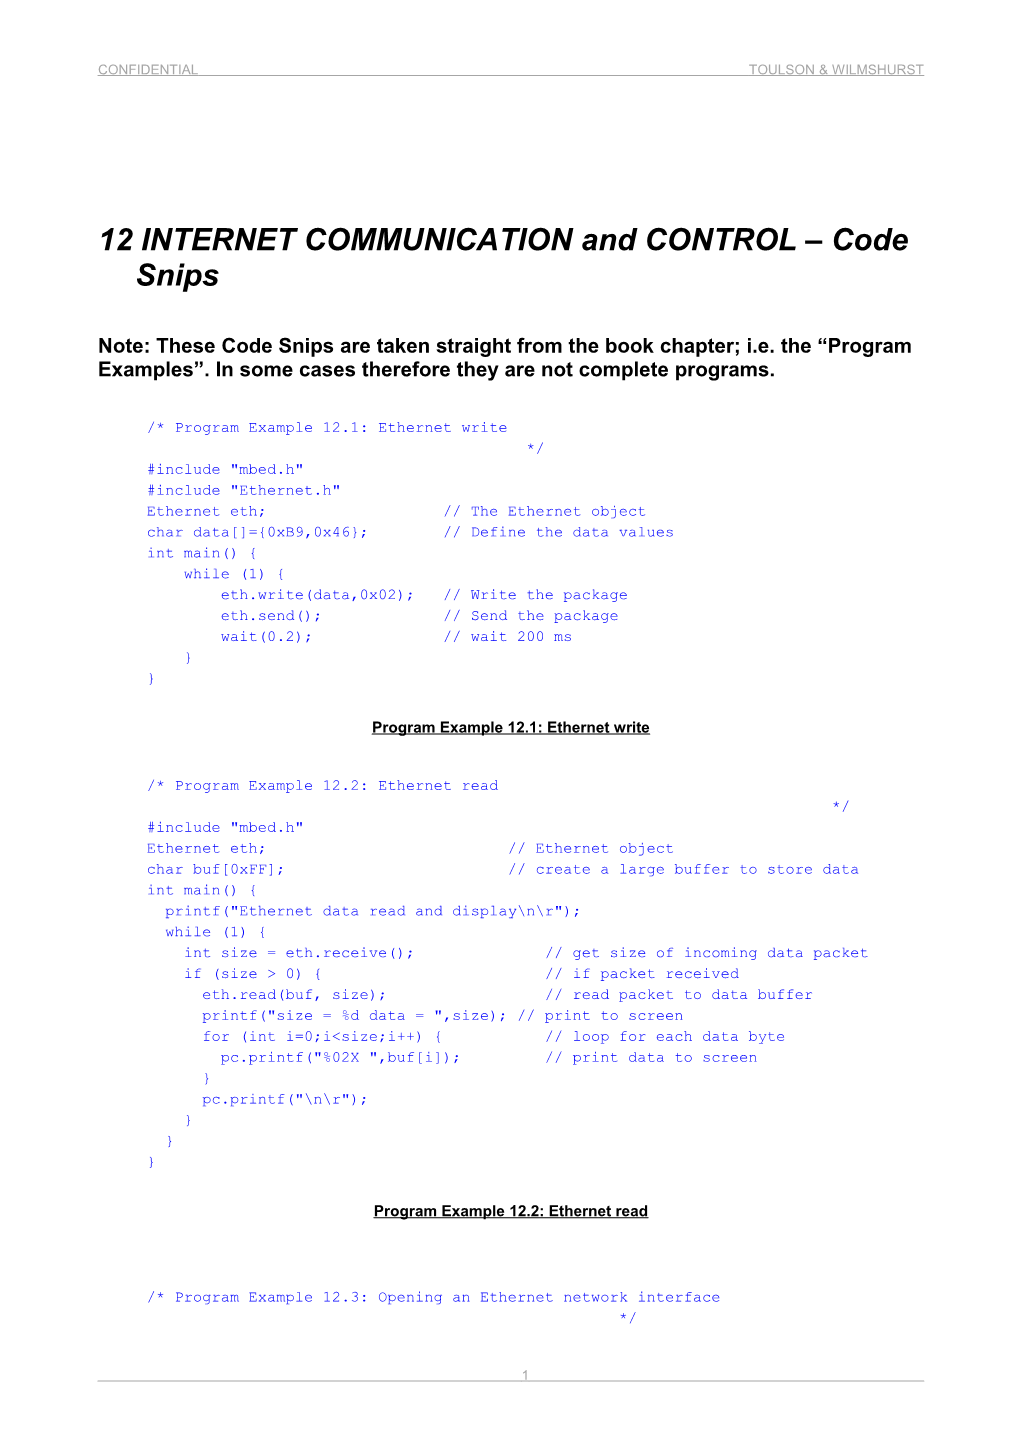 12INTERNET COMMUNICATION and CONTROL Code Snips